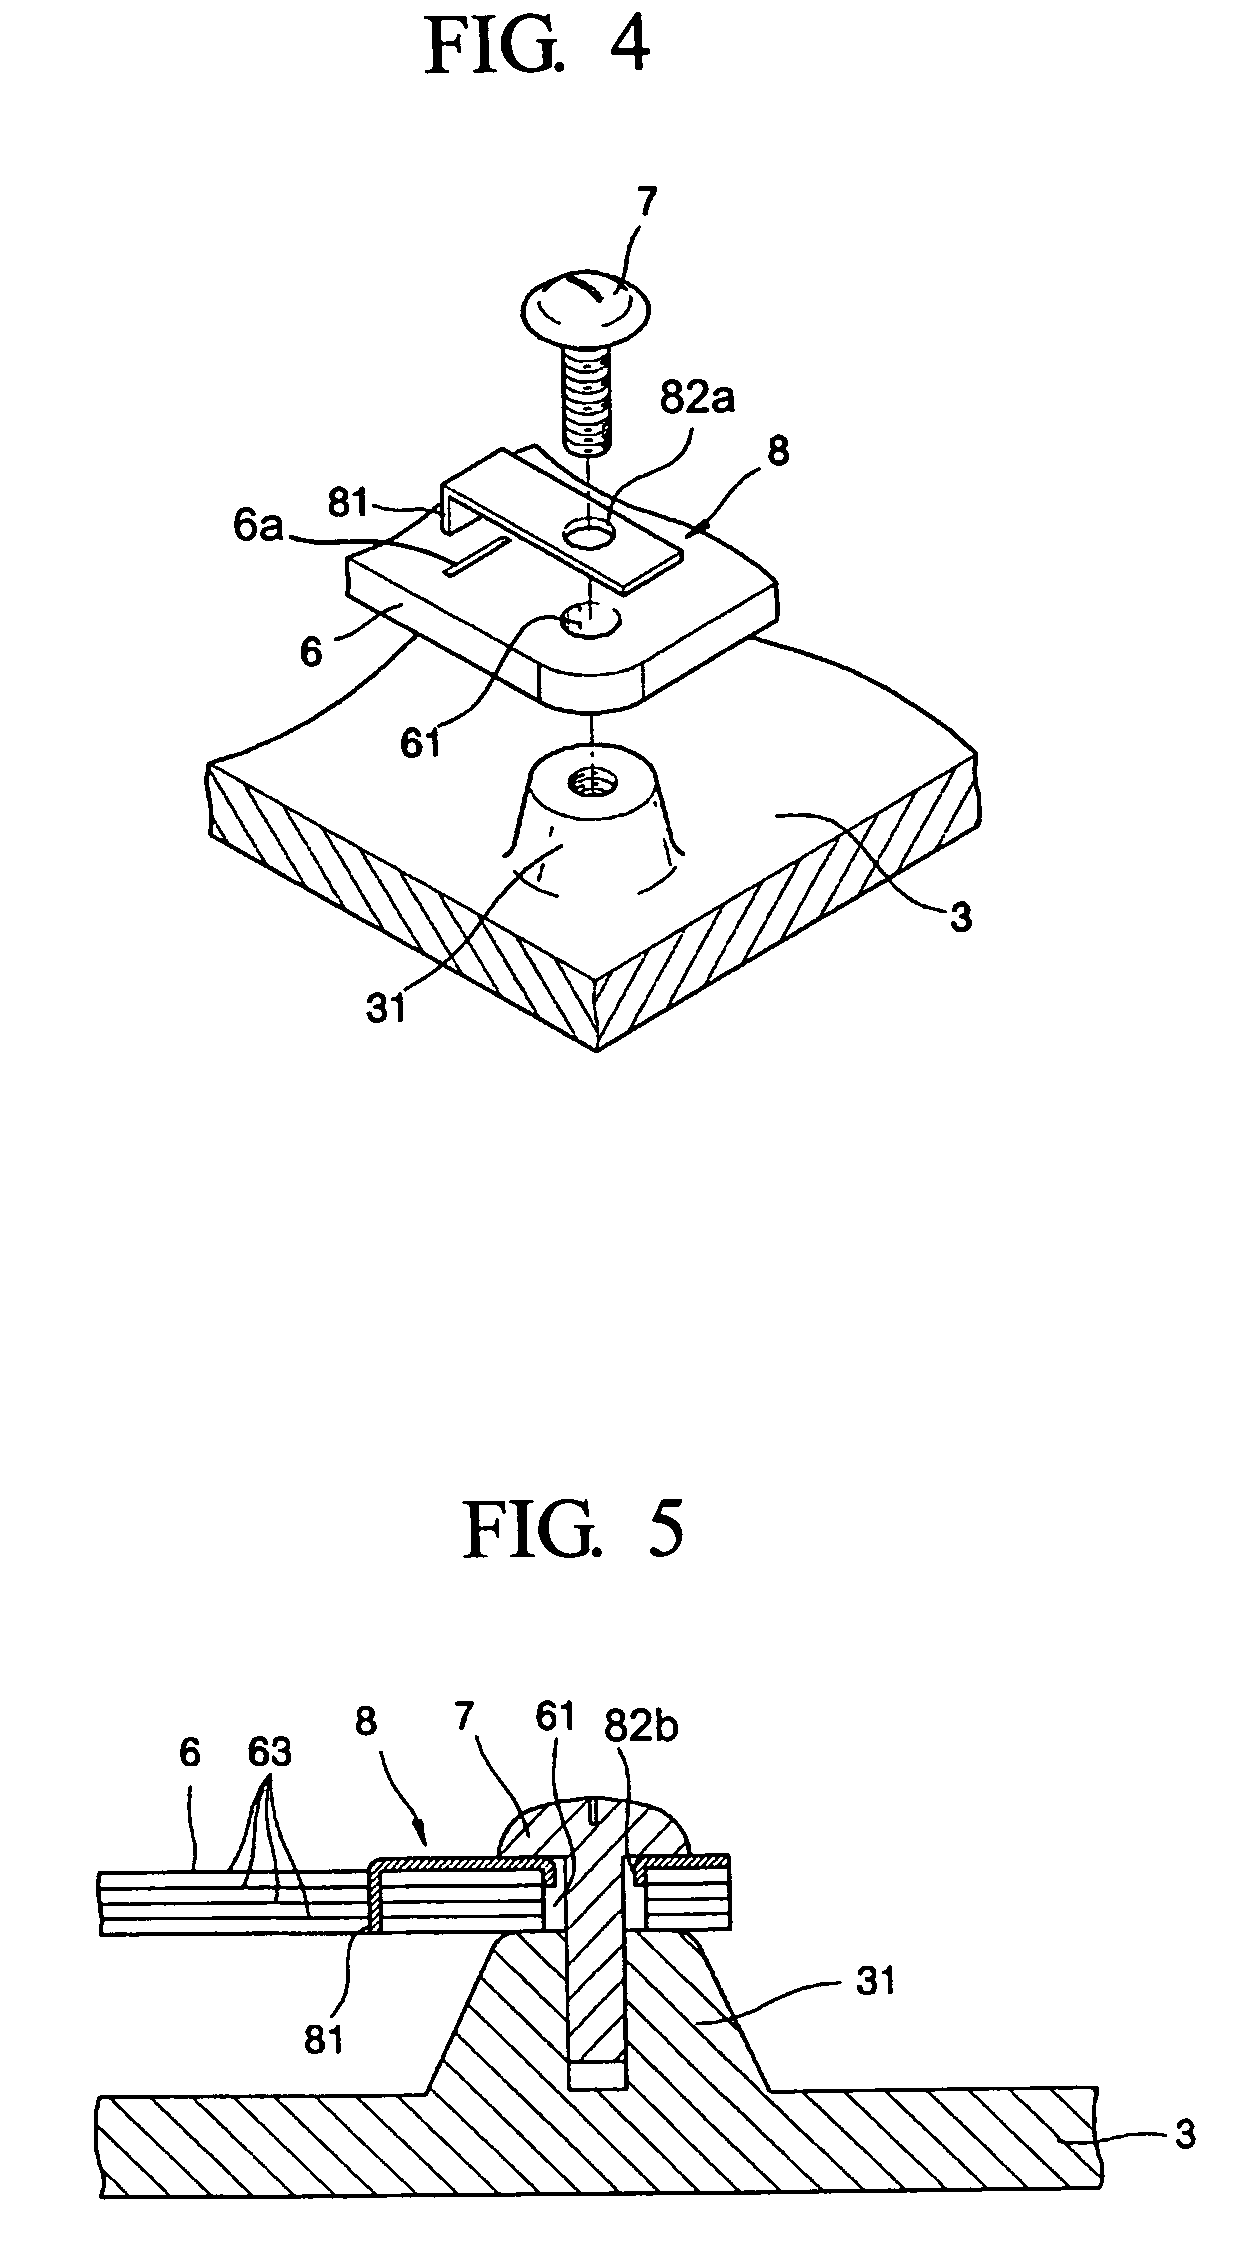 Structures for coupling and grounding a circuit board in a plasma display device